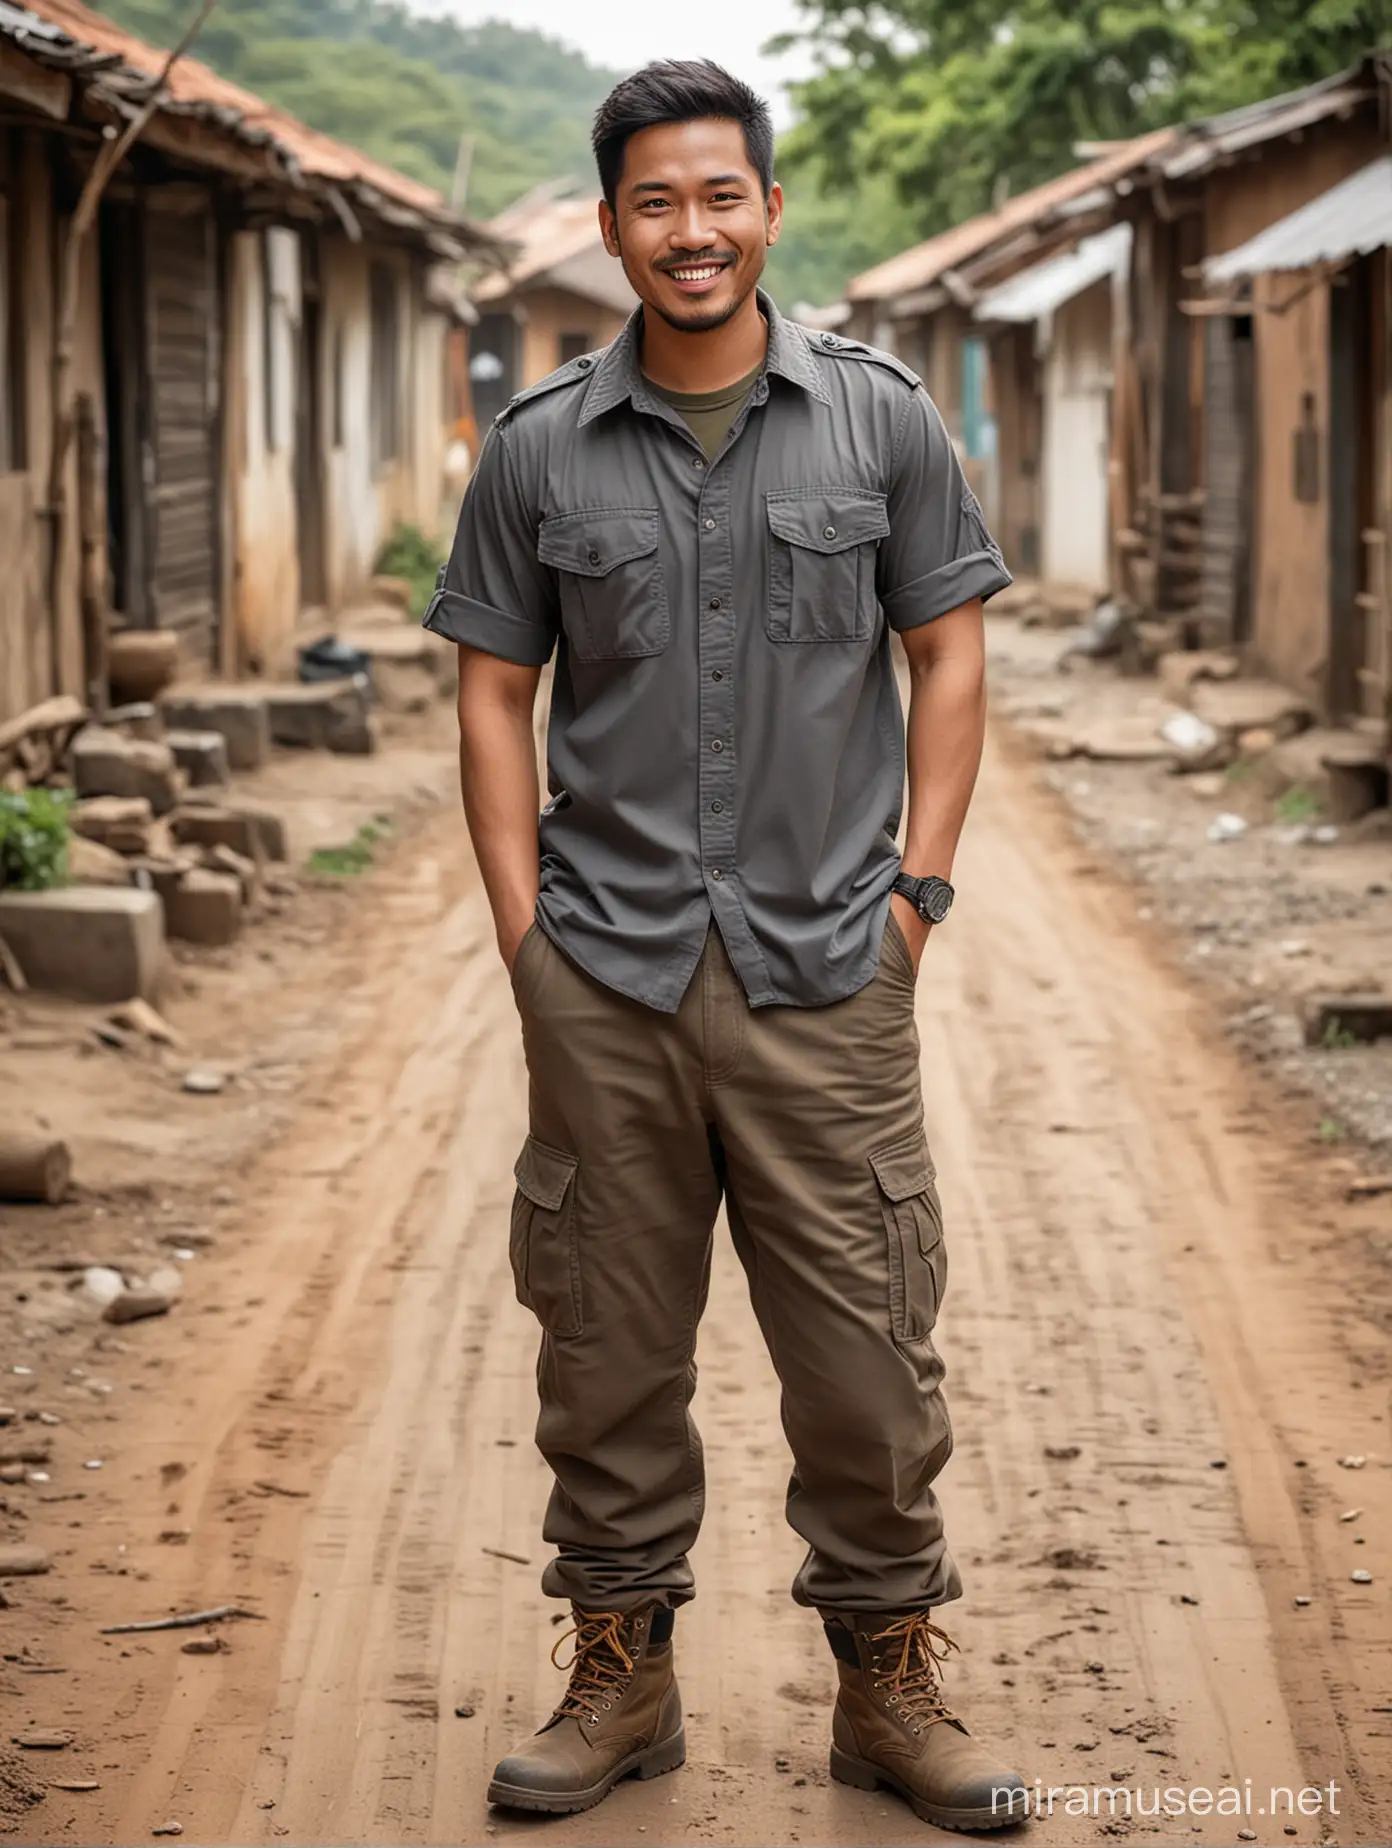 Smiling Indonesian Man in Tactical Attire Stands on Village Dirt Road